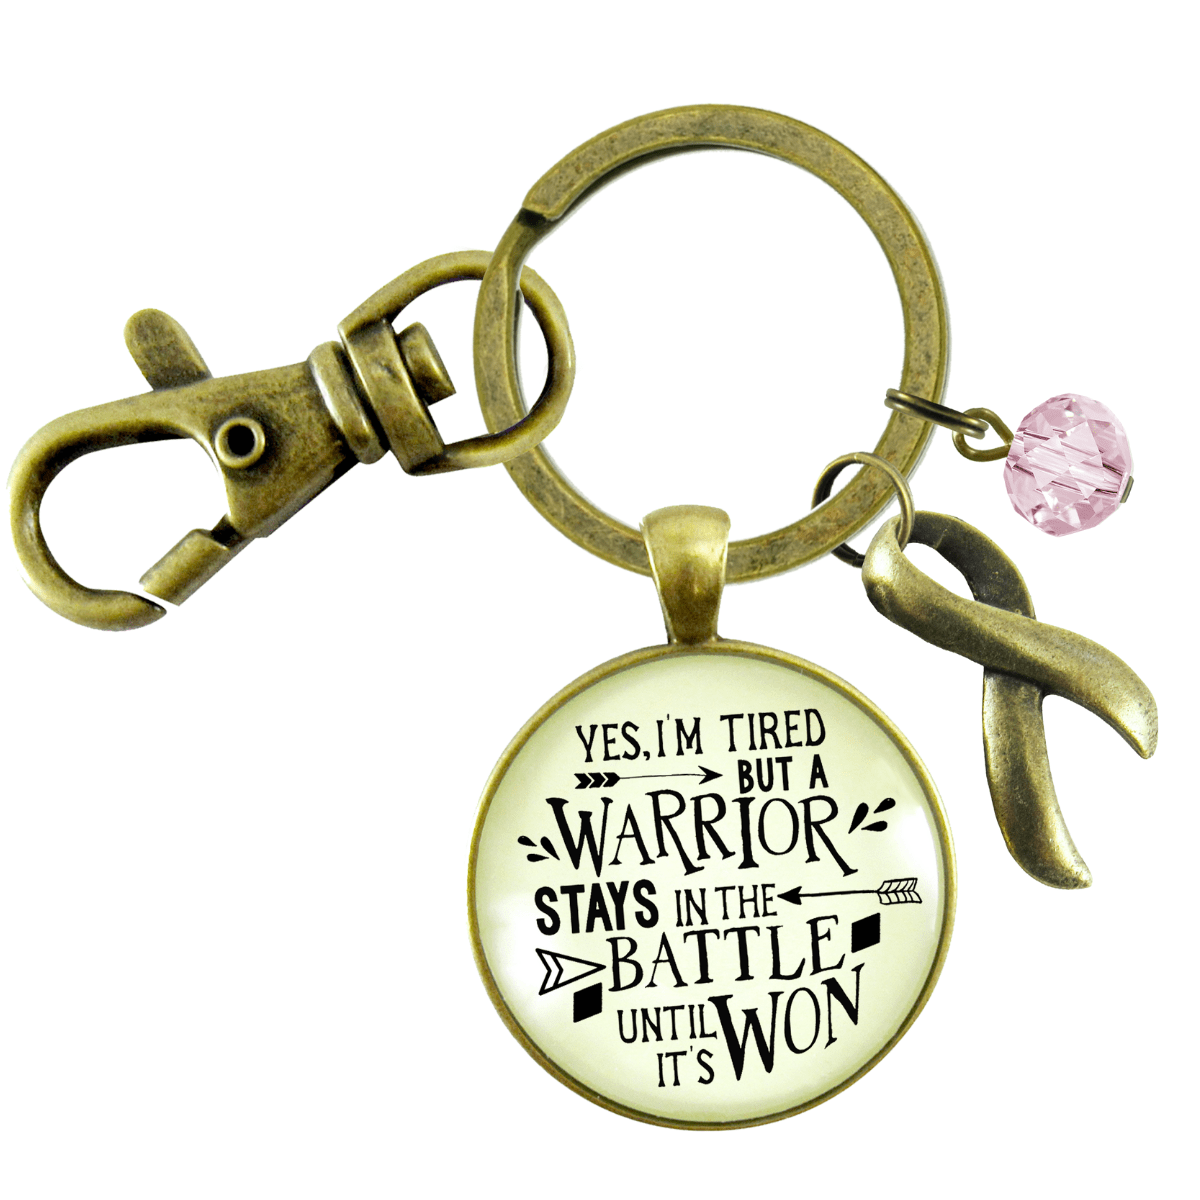 Breast Cancer Keychain Yes I Am Tired But A Warrior Positive Life Survivor Jewelry Pink - Gutsy Goodness;Breast Cancer Keychain Yes I Am Tired But A Warrior Positive Life Survivor Jewelry Pink - Gutsy Goodness Handmade Jewelry Gifts